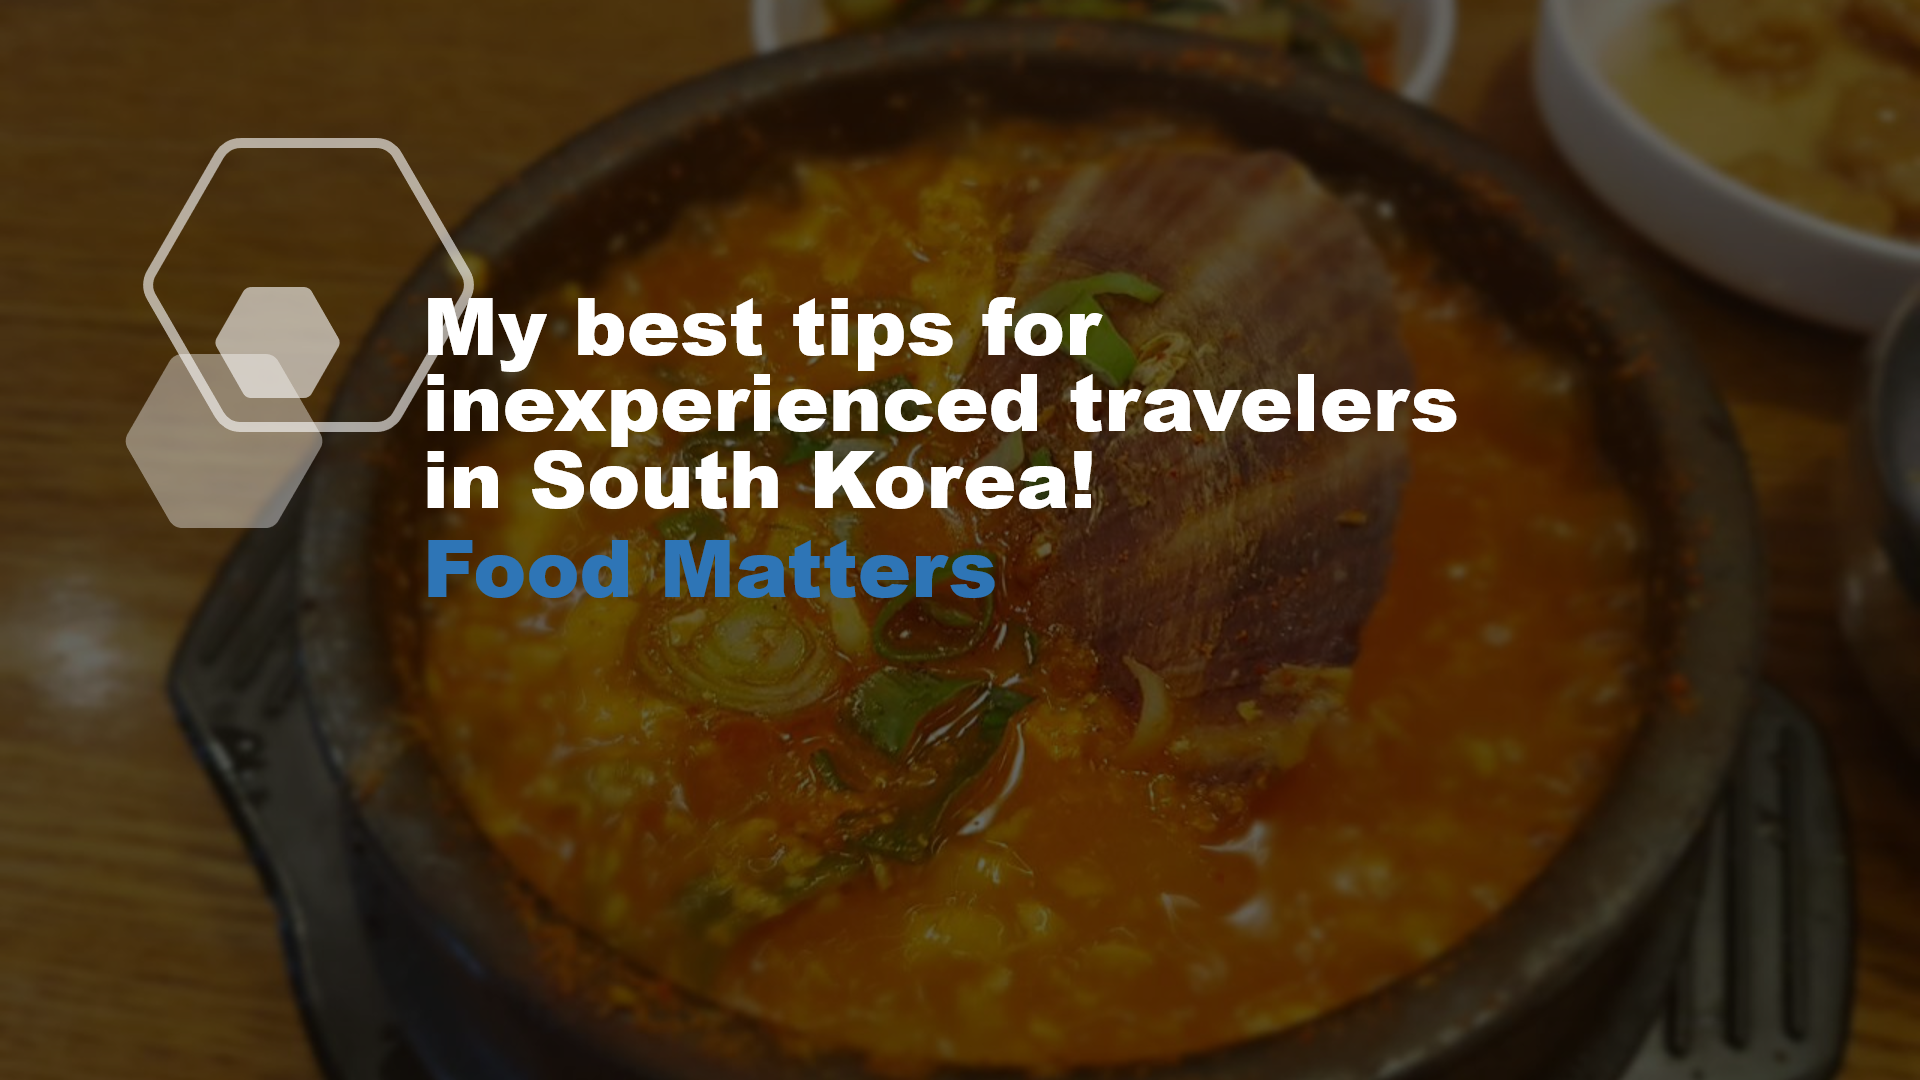 My best tips for inexperienced travellers in South Korea! Food Matters